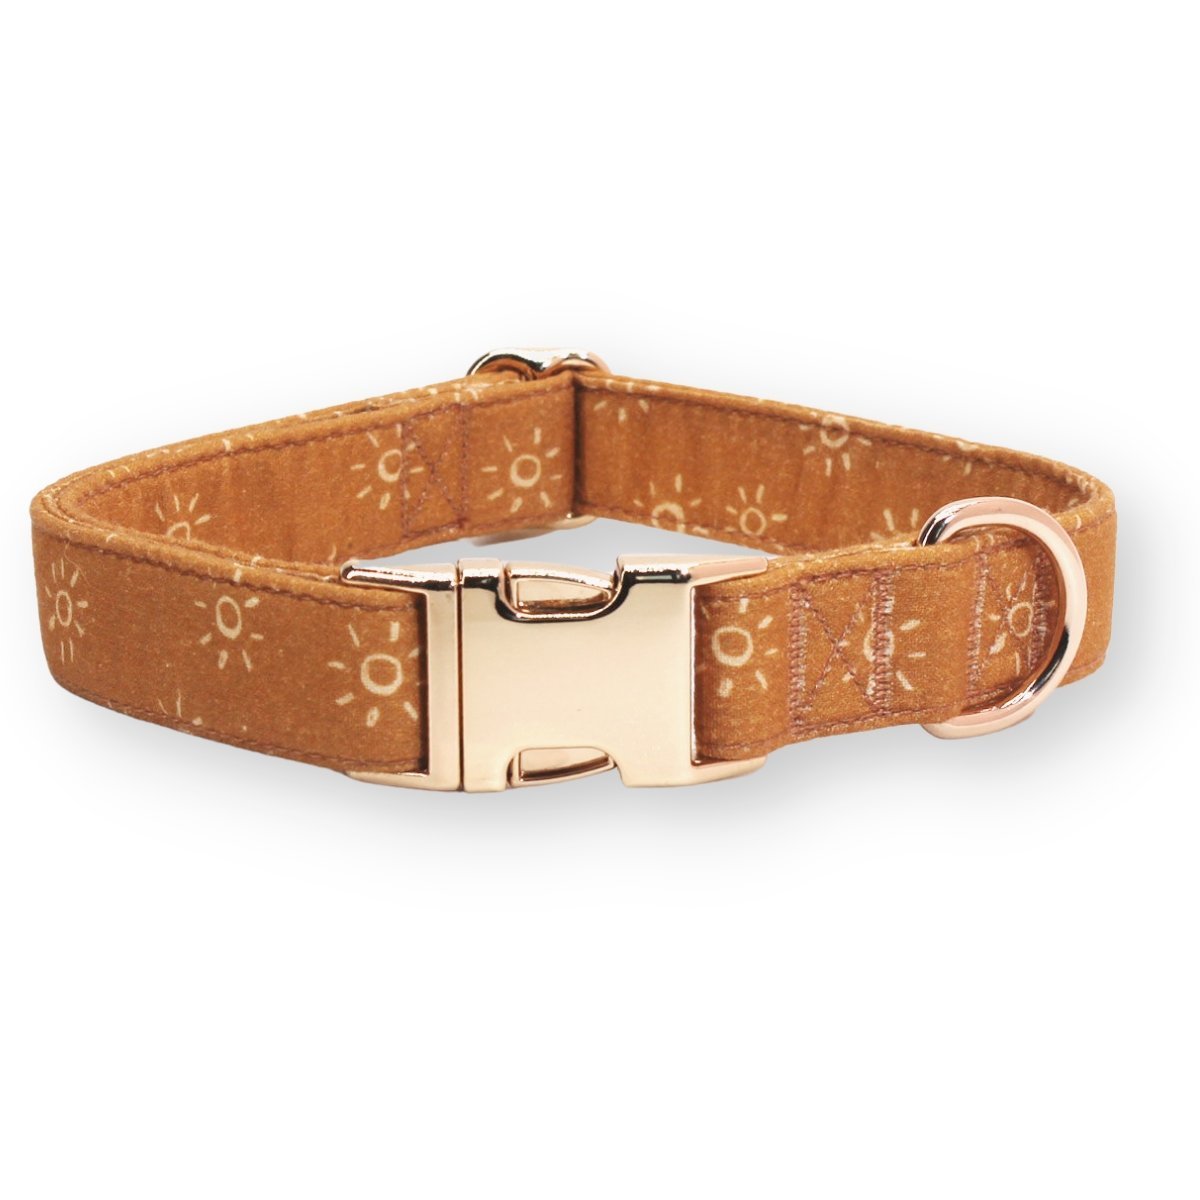 Authentic Louis Vuitton Baxter Dog Collar With Bow And LeashSize